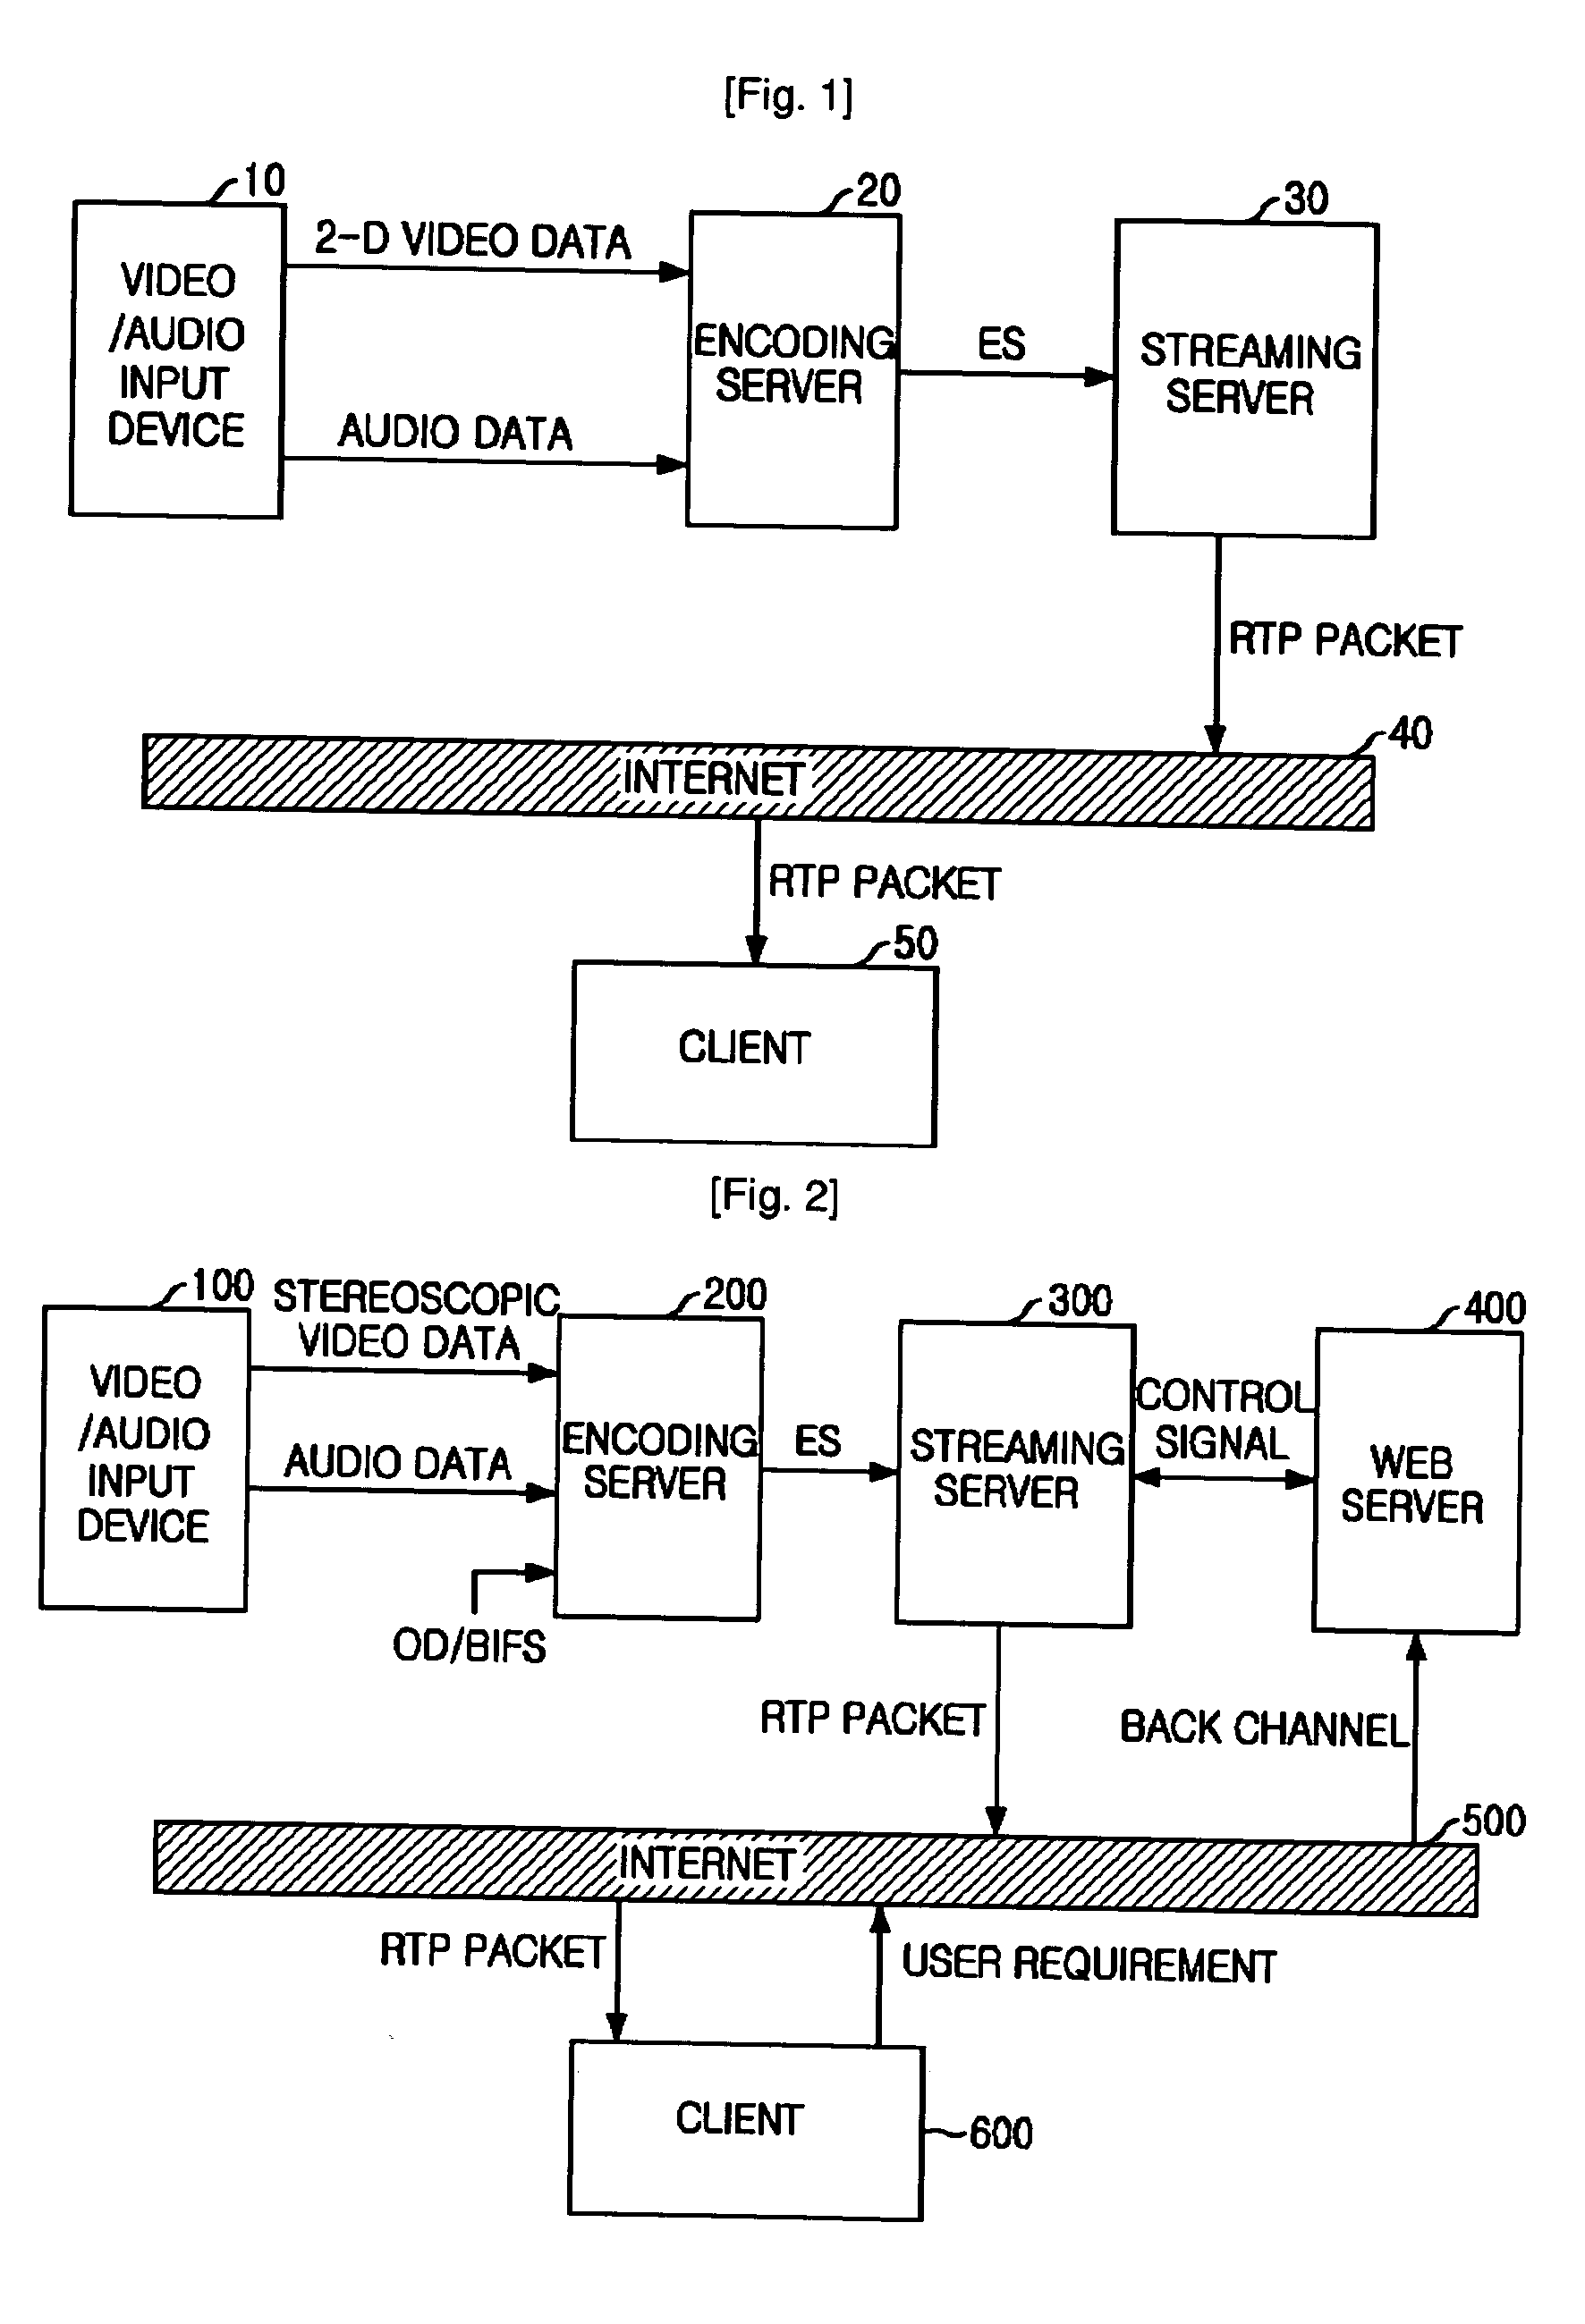 System and method for internet broadcasting of mpeg-4-based stereoscopic video